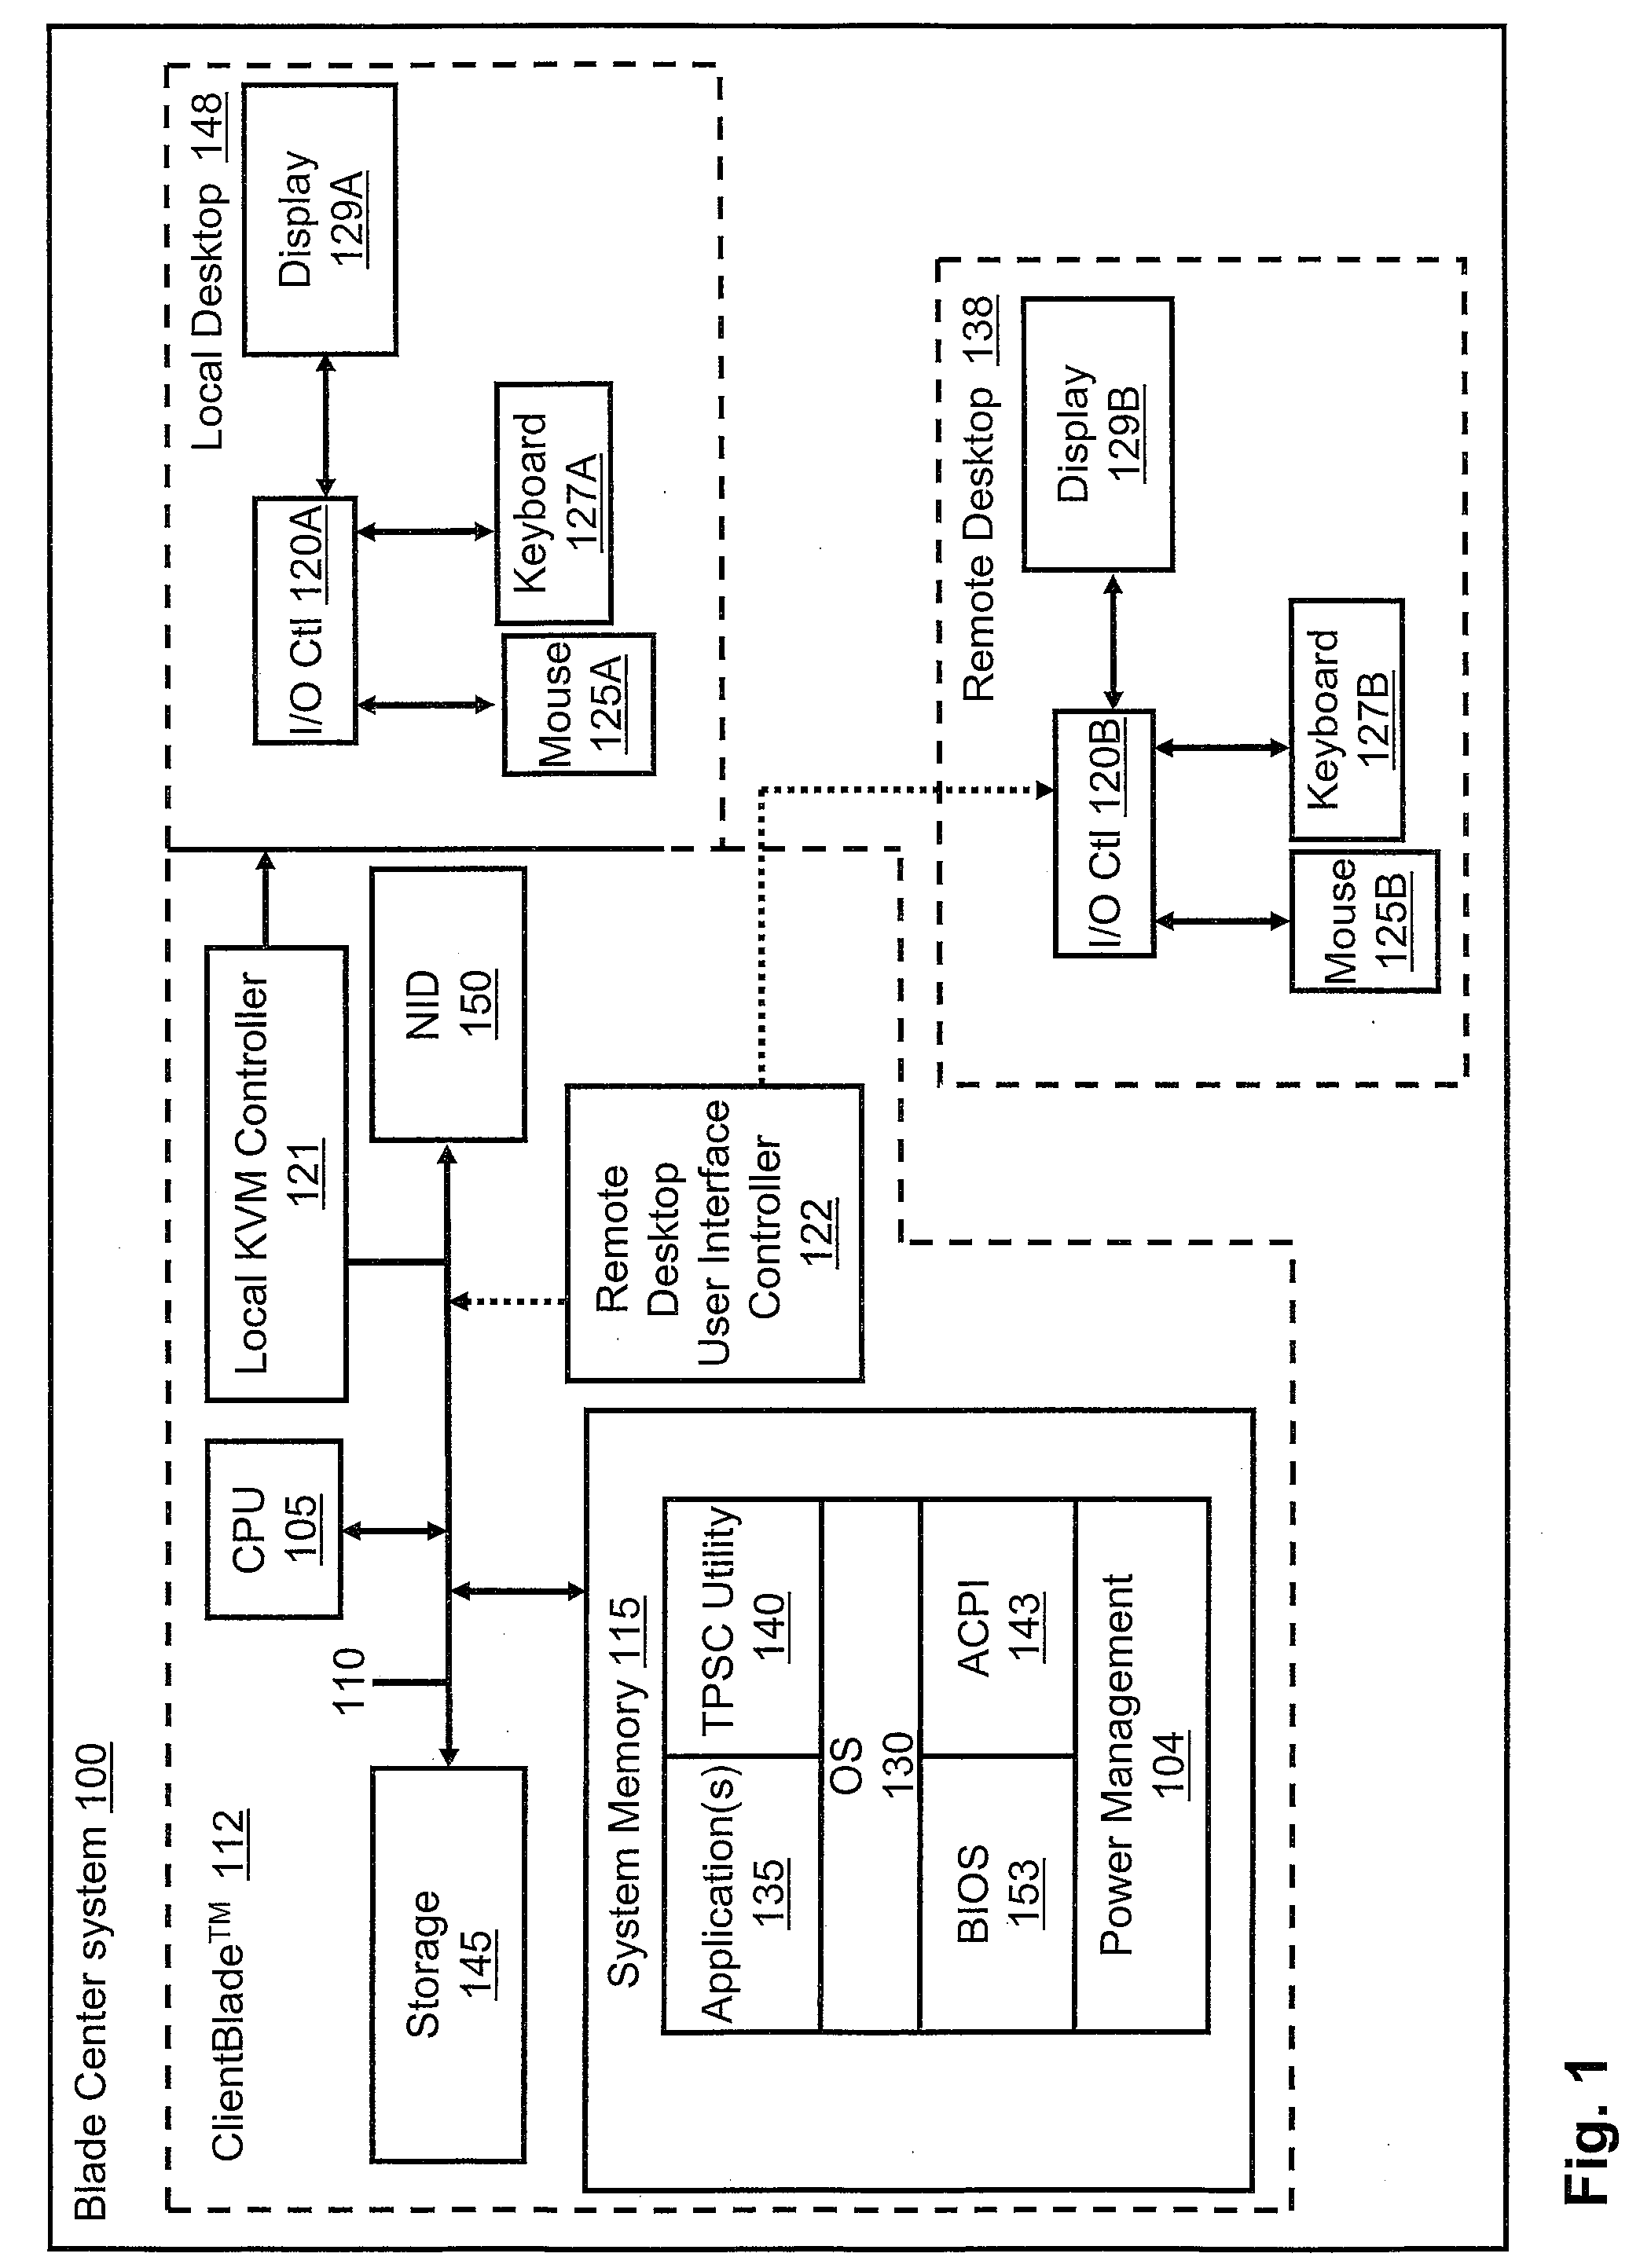 Method of Power State Control for a ClientbladeTM in a BladecenterTM System